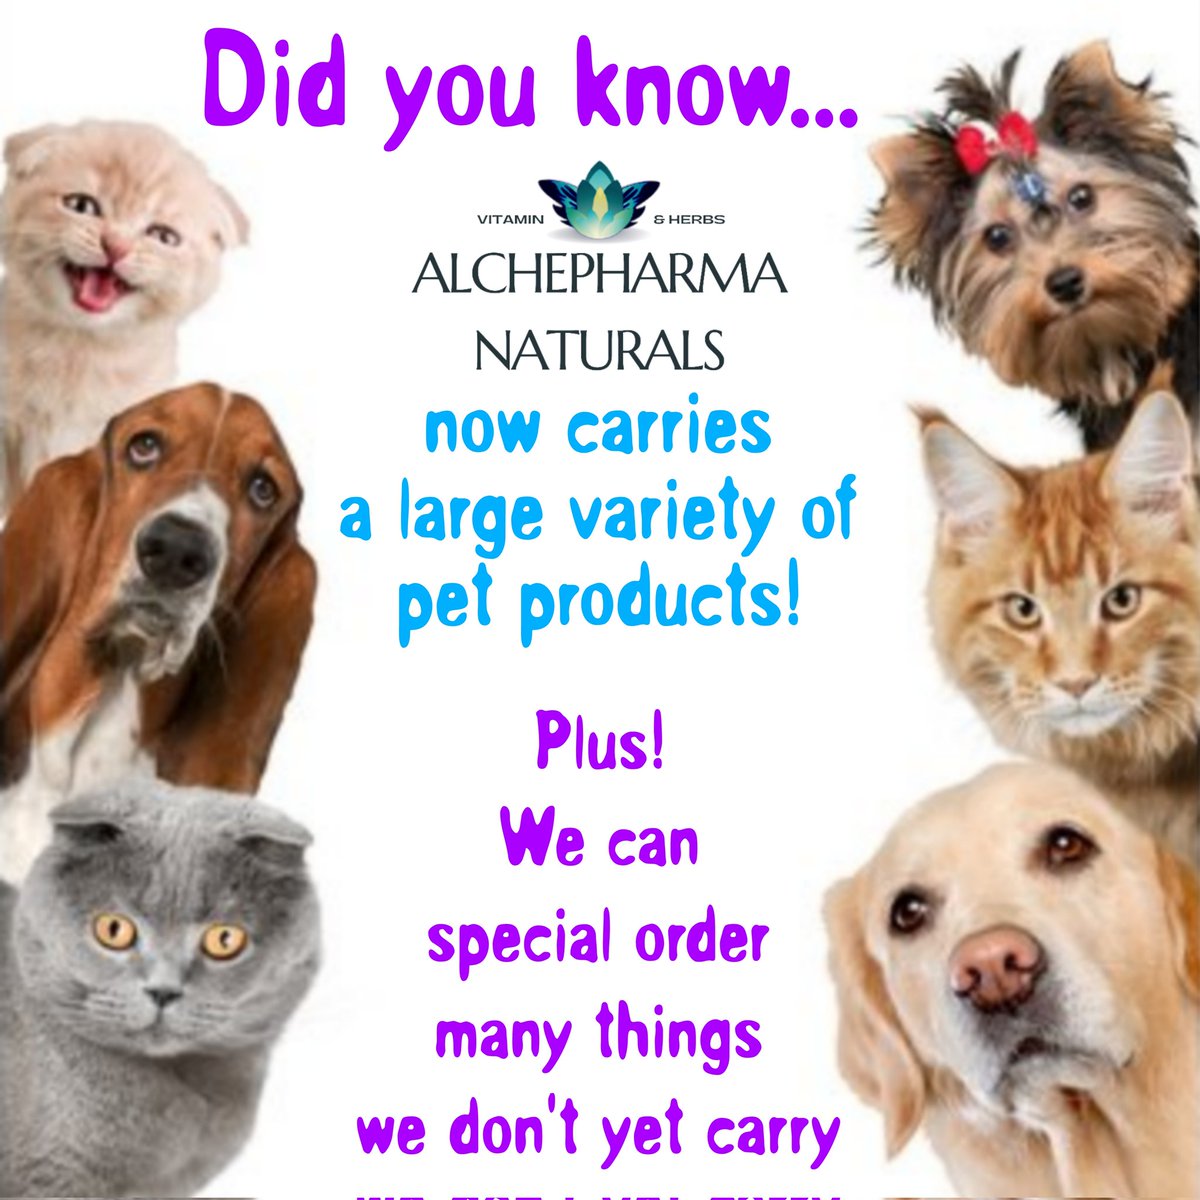 Over at #AlchePharmaNaturals we've started to prioritize carrying products for our 

#HealthFoodStore #vitaminstore #supplementstore #smallbuisness #Nipomo #Orcutt #centralcoast #petcbd #dogs #petsafe #dogfood #PetSimulator99 #cats #catfood #naturalpetcare